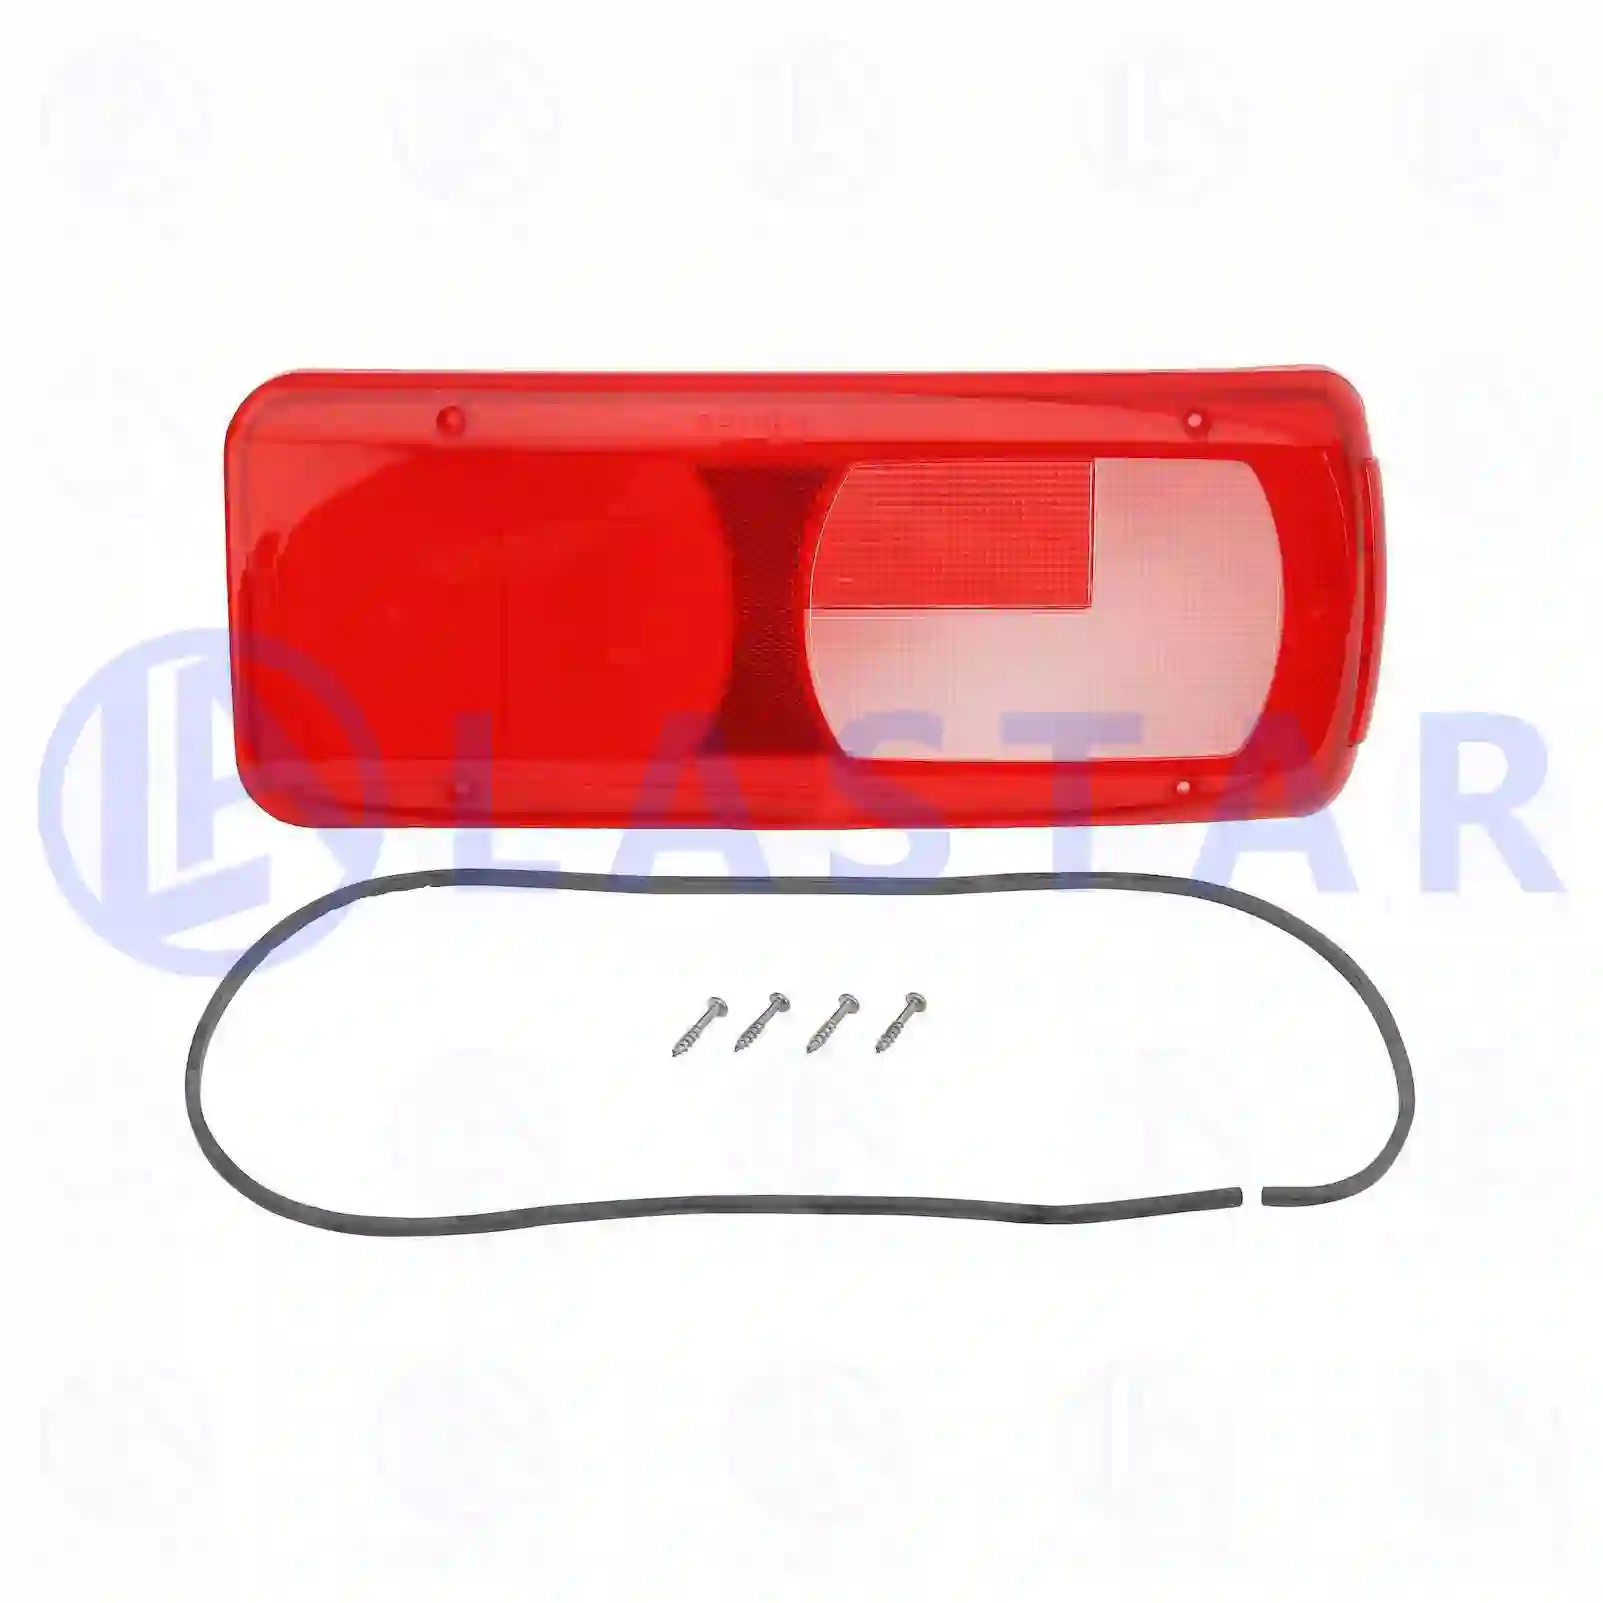 Tail lamp glass, right, 77712547, 1914691, ZG21092-0008 ||  77712547 Lastar Spare Part | Truck Spare Parts, Auotomotive Spare Parts Tail lamp glass, right, 77712547, 1914691, ZG21092-0008 ||  77712547 Lastar Spare Part | Truck Spare Parts, Auotomotive Spare Parts